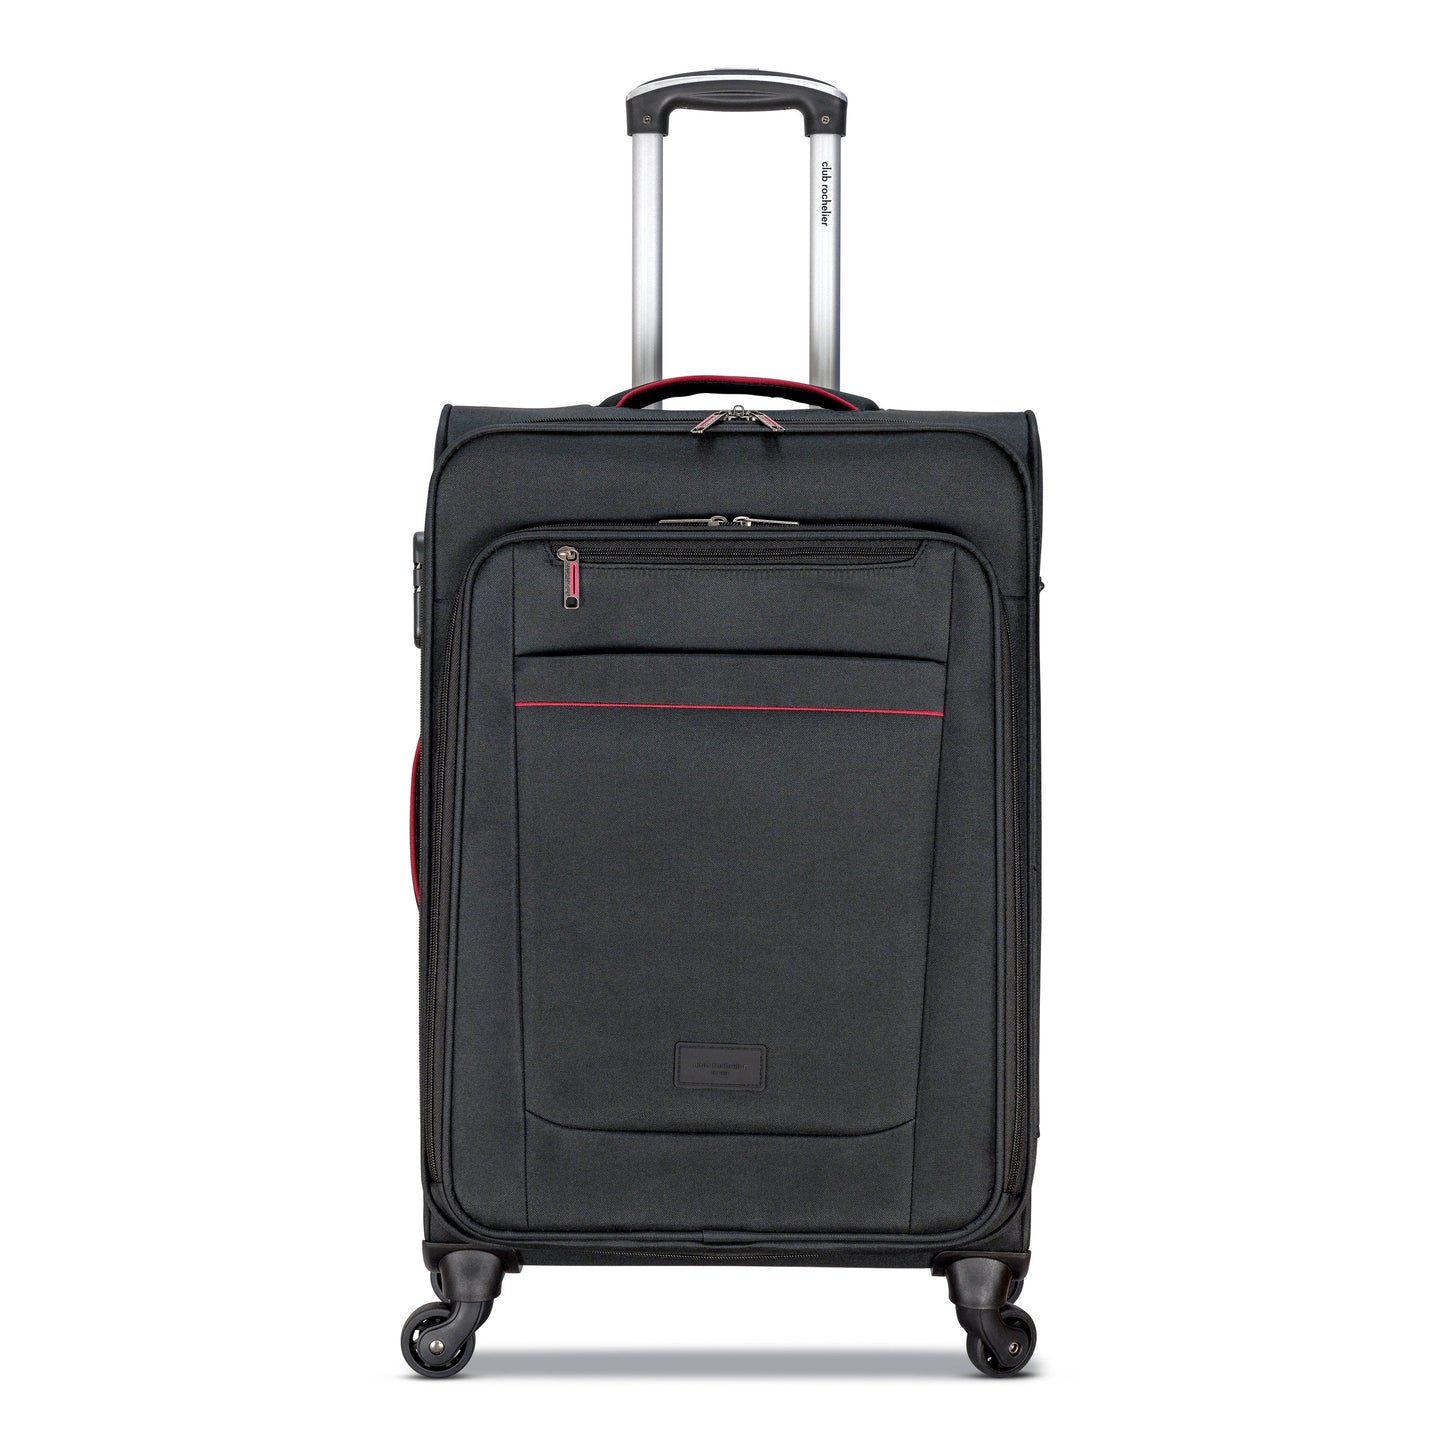 3 Piece Set Soft Side Luggage with Contrast Piped Trim